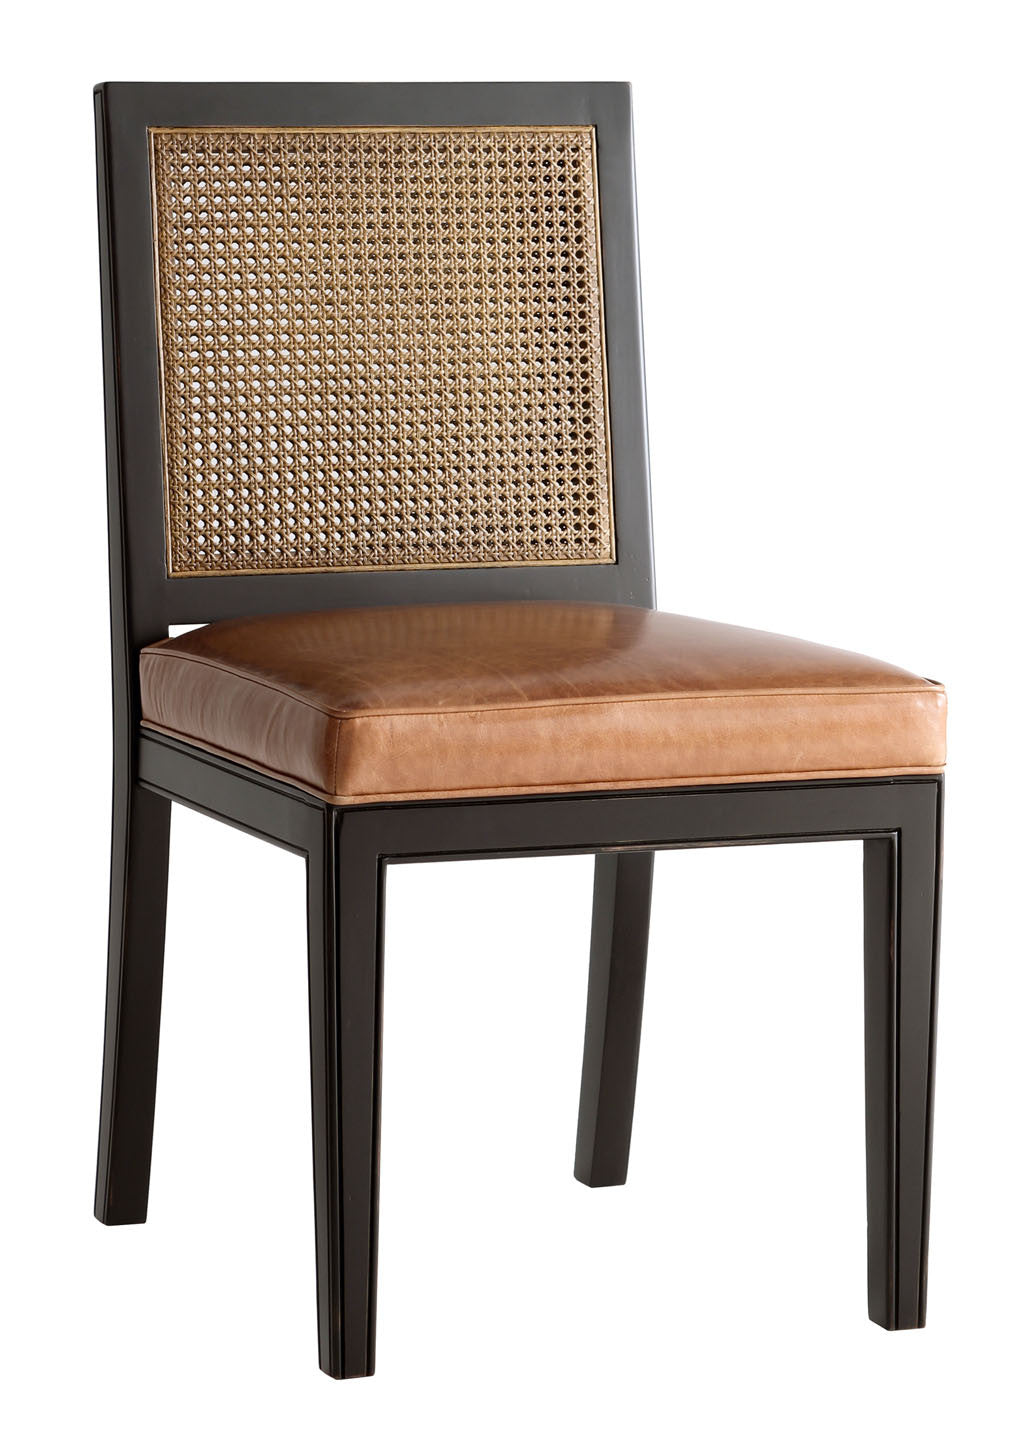 Furniture - Oliver Side Chair - Black & Saddle (see More Finish & Fabric Options)